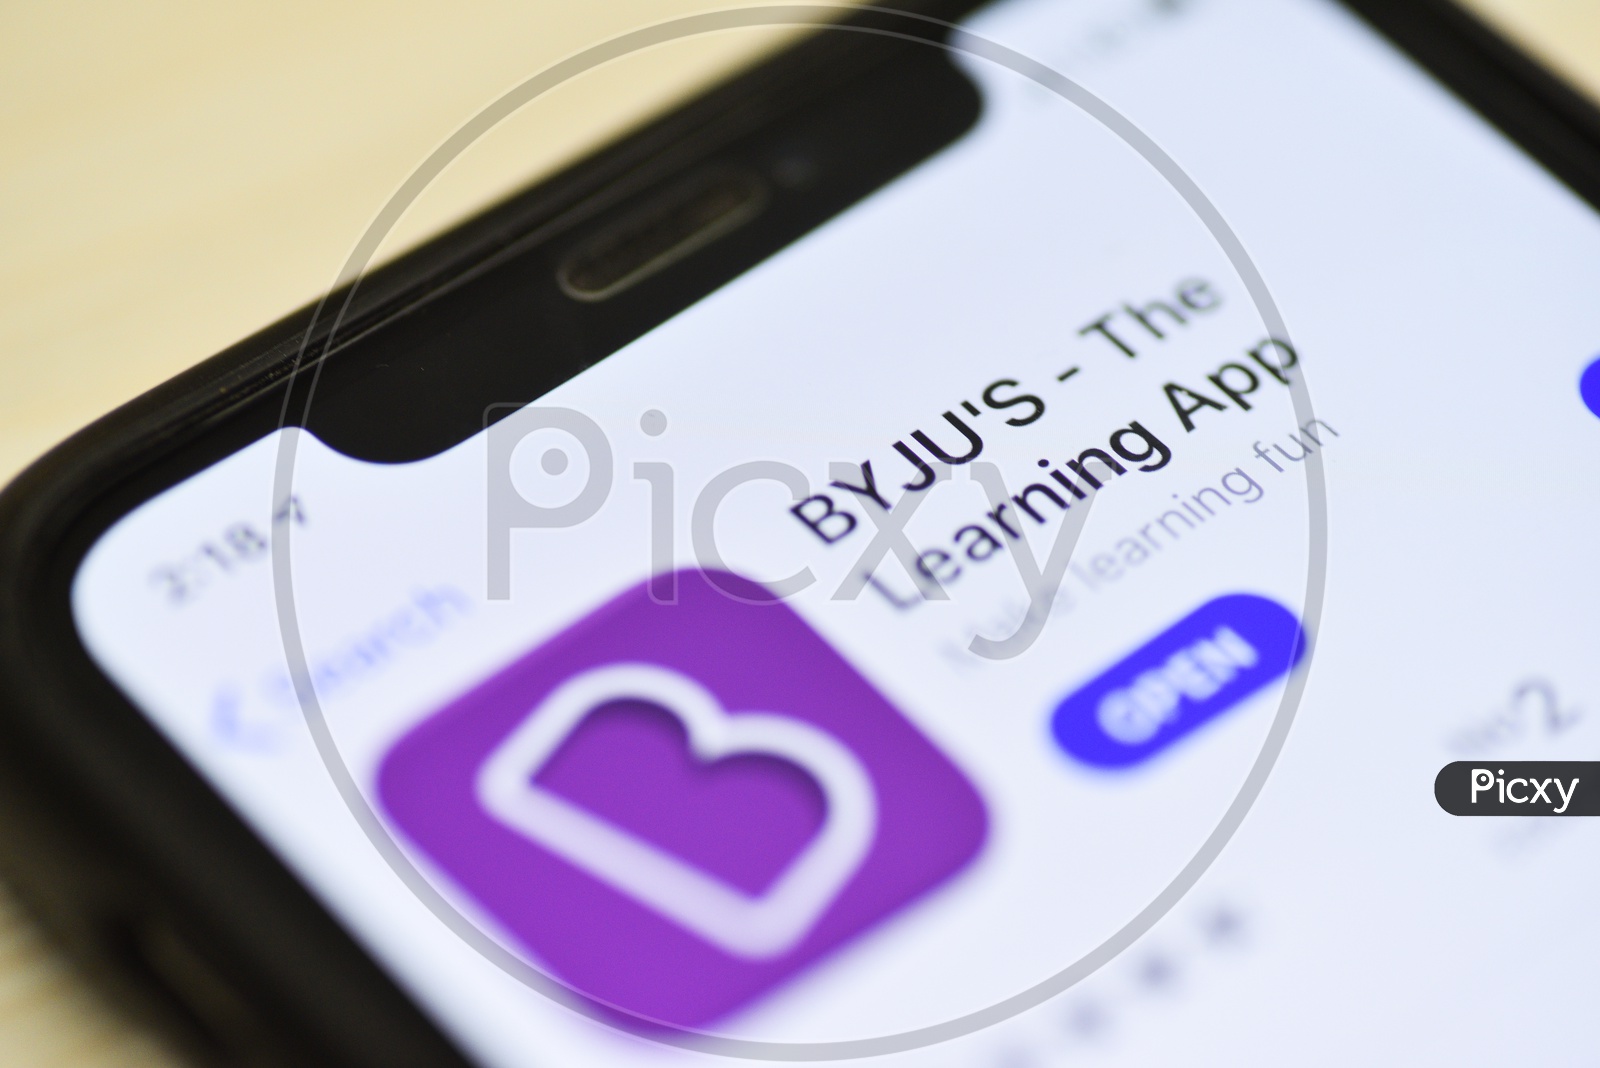 BYJU's Or BYJUS The Learning App or Application in  Mobile  or Smartphone  Closeup